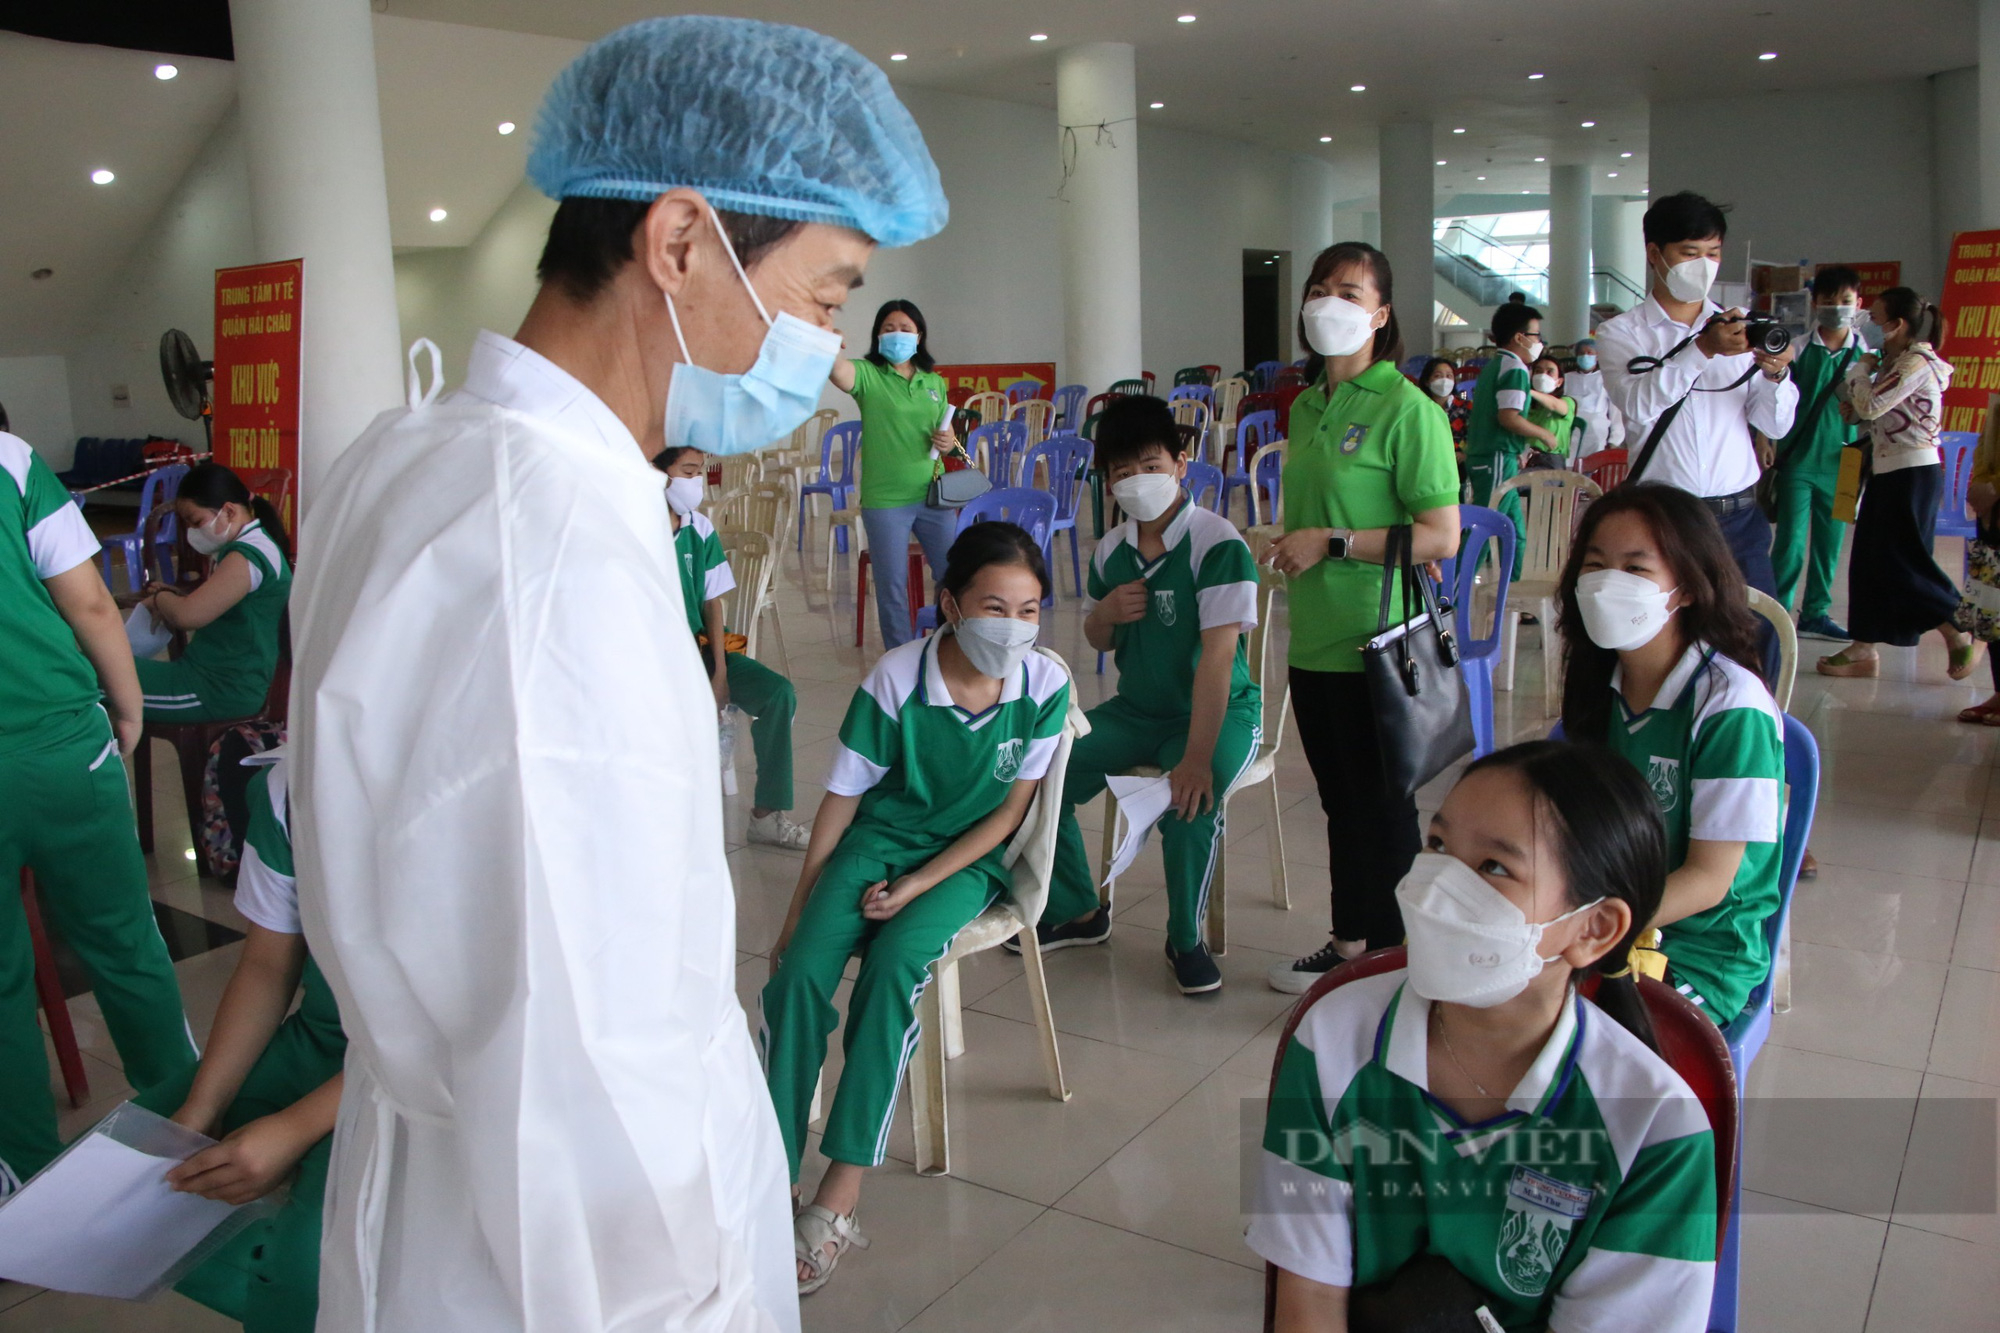 Da Nang: Parents wake up early, leave work to take their children to get Covid-19 vaccine - Photo 1.